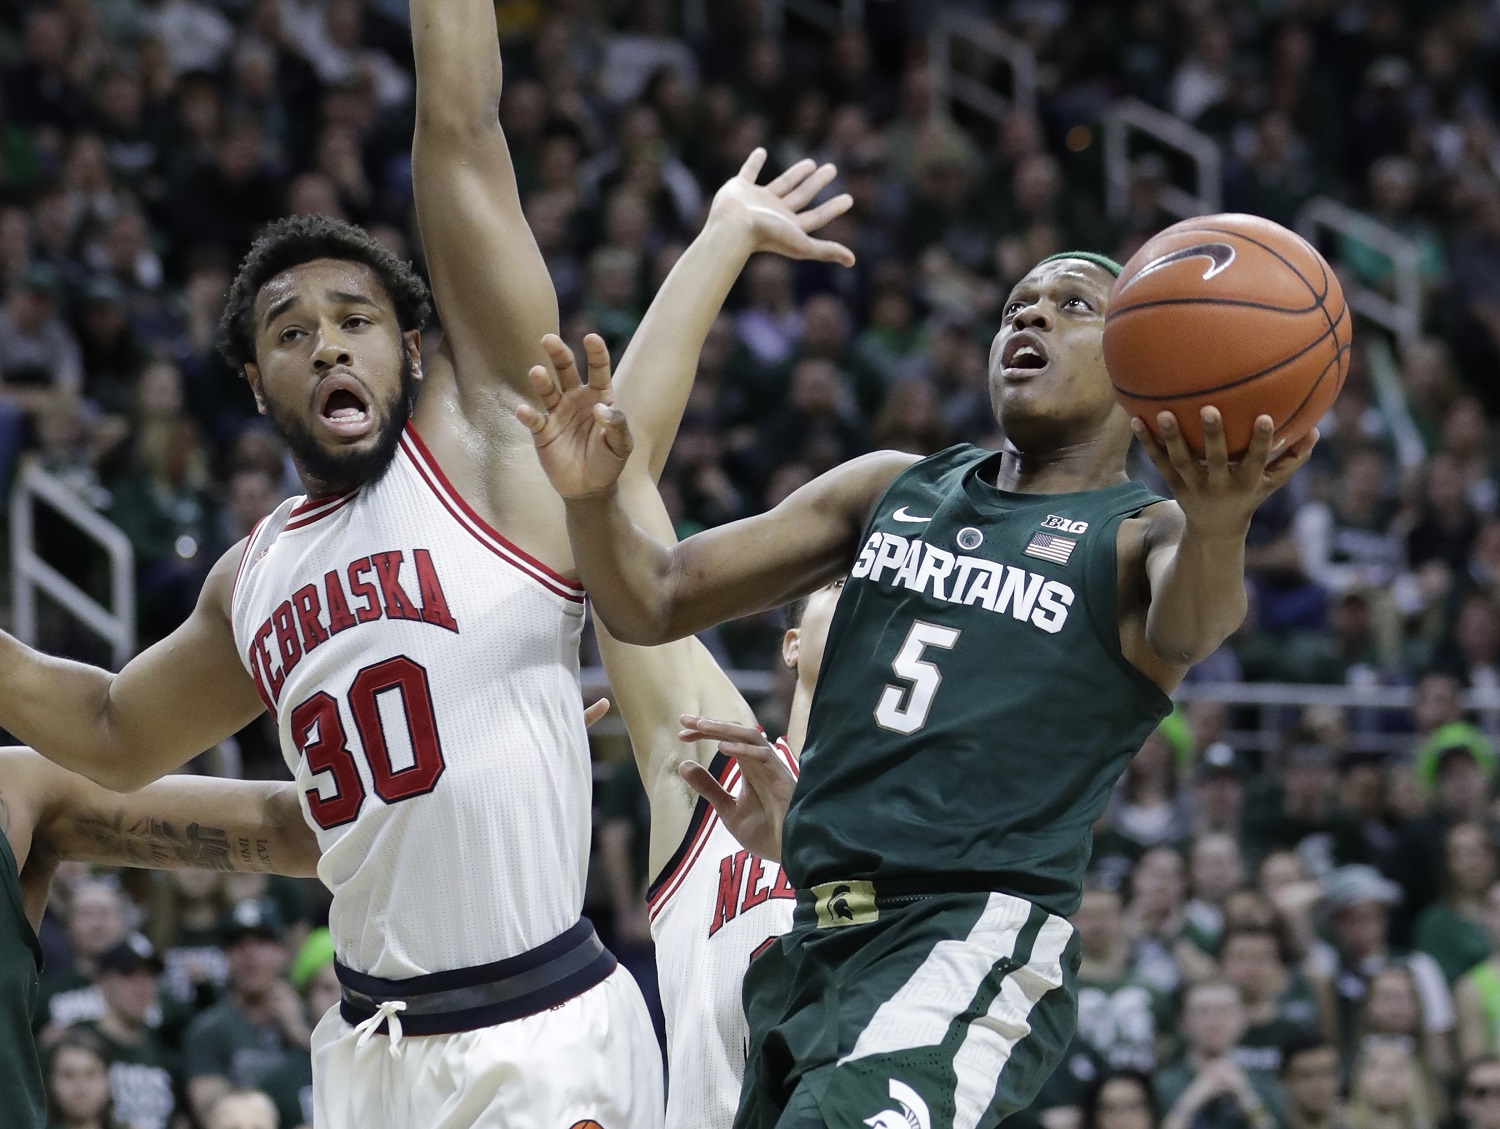 Michigan State guard Cassius Winston (5) makes a layup defended by Nebraska forward Ed Morrow (30) during the second half of an NCAA college basketball game, Thursday, Feb. 23, 2017, in East Lansing, Mich. (AP Photo/Carlos Osorio)